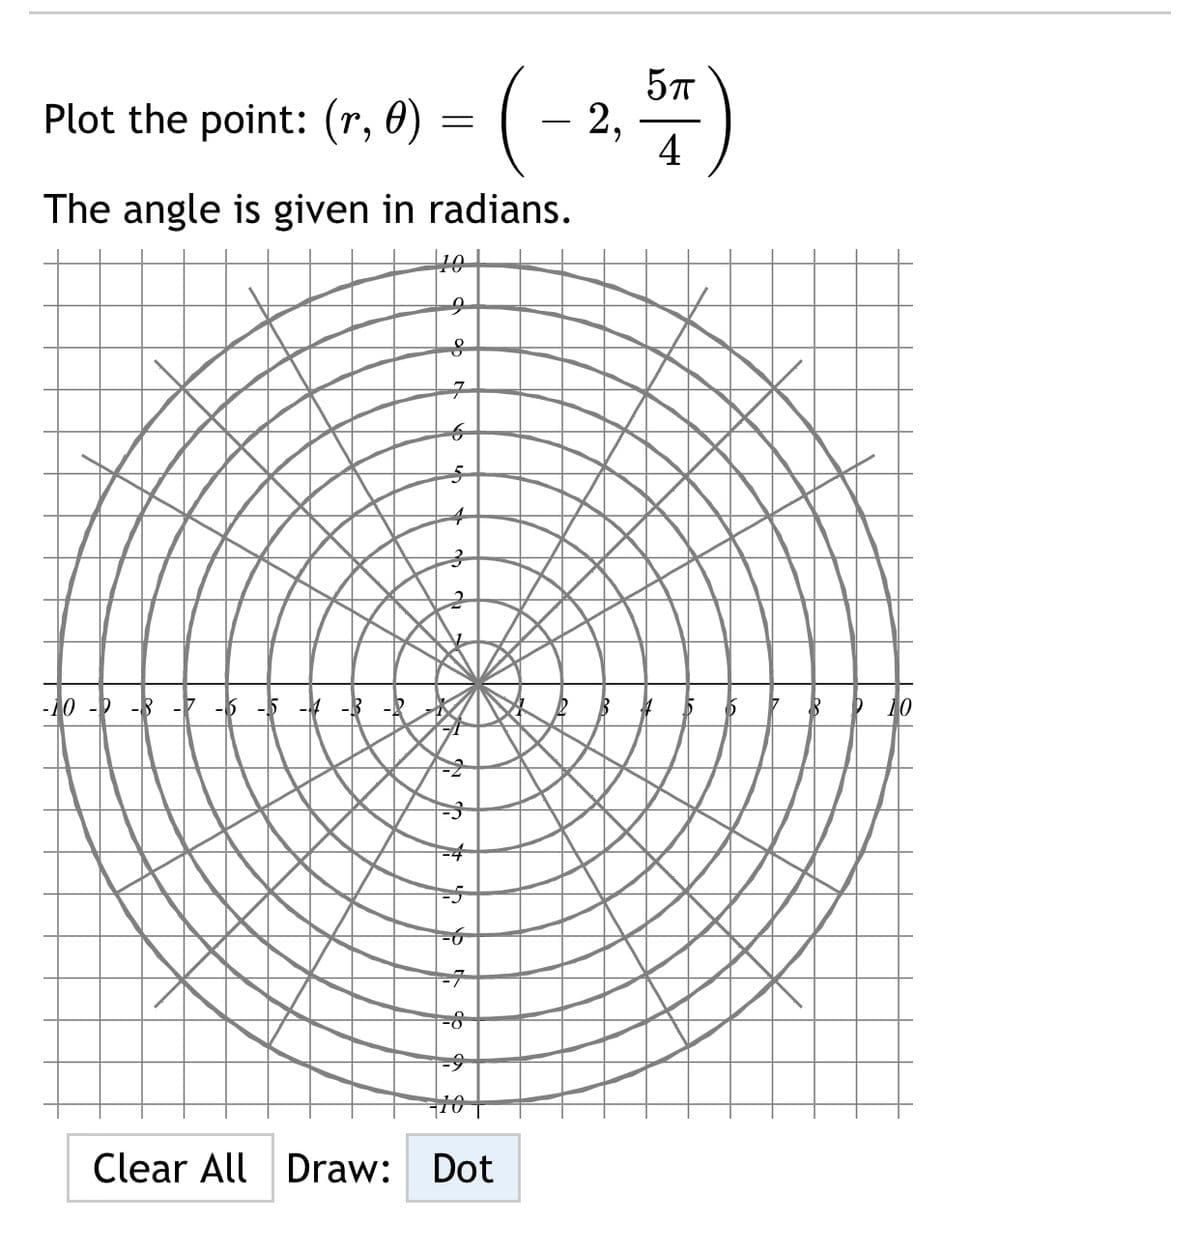 (-2, )
Plot the point: (r, 0)
4
The angle is given in radians.
-8
Clear All Draw: Dot
